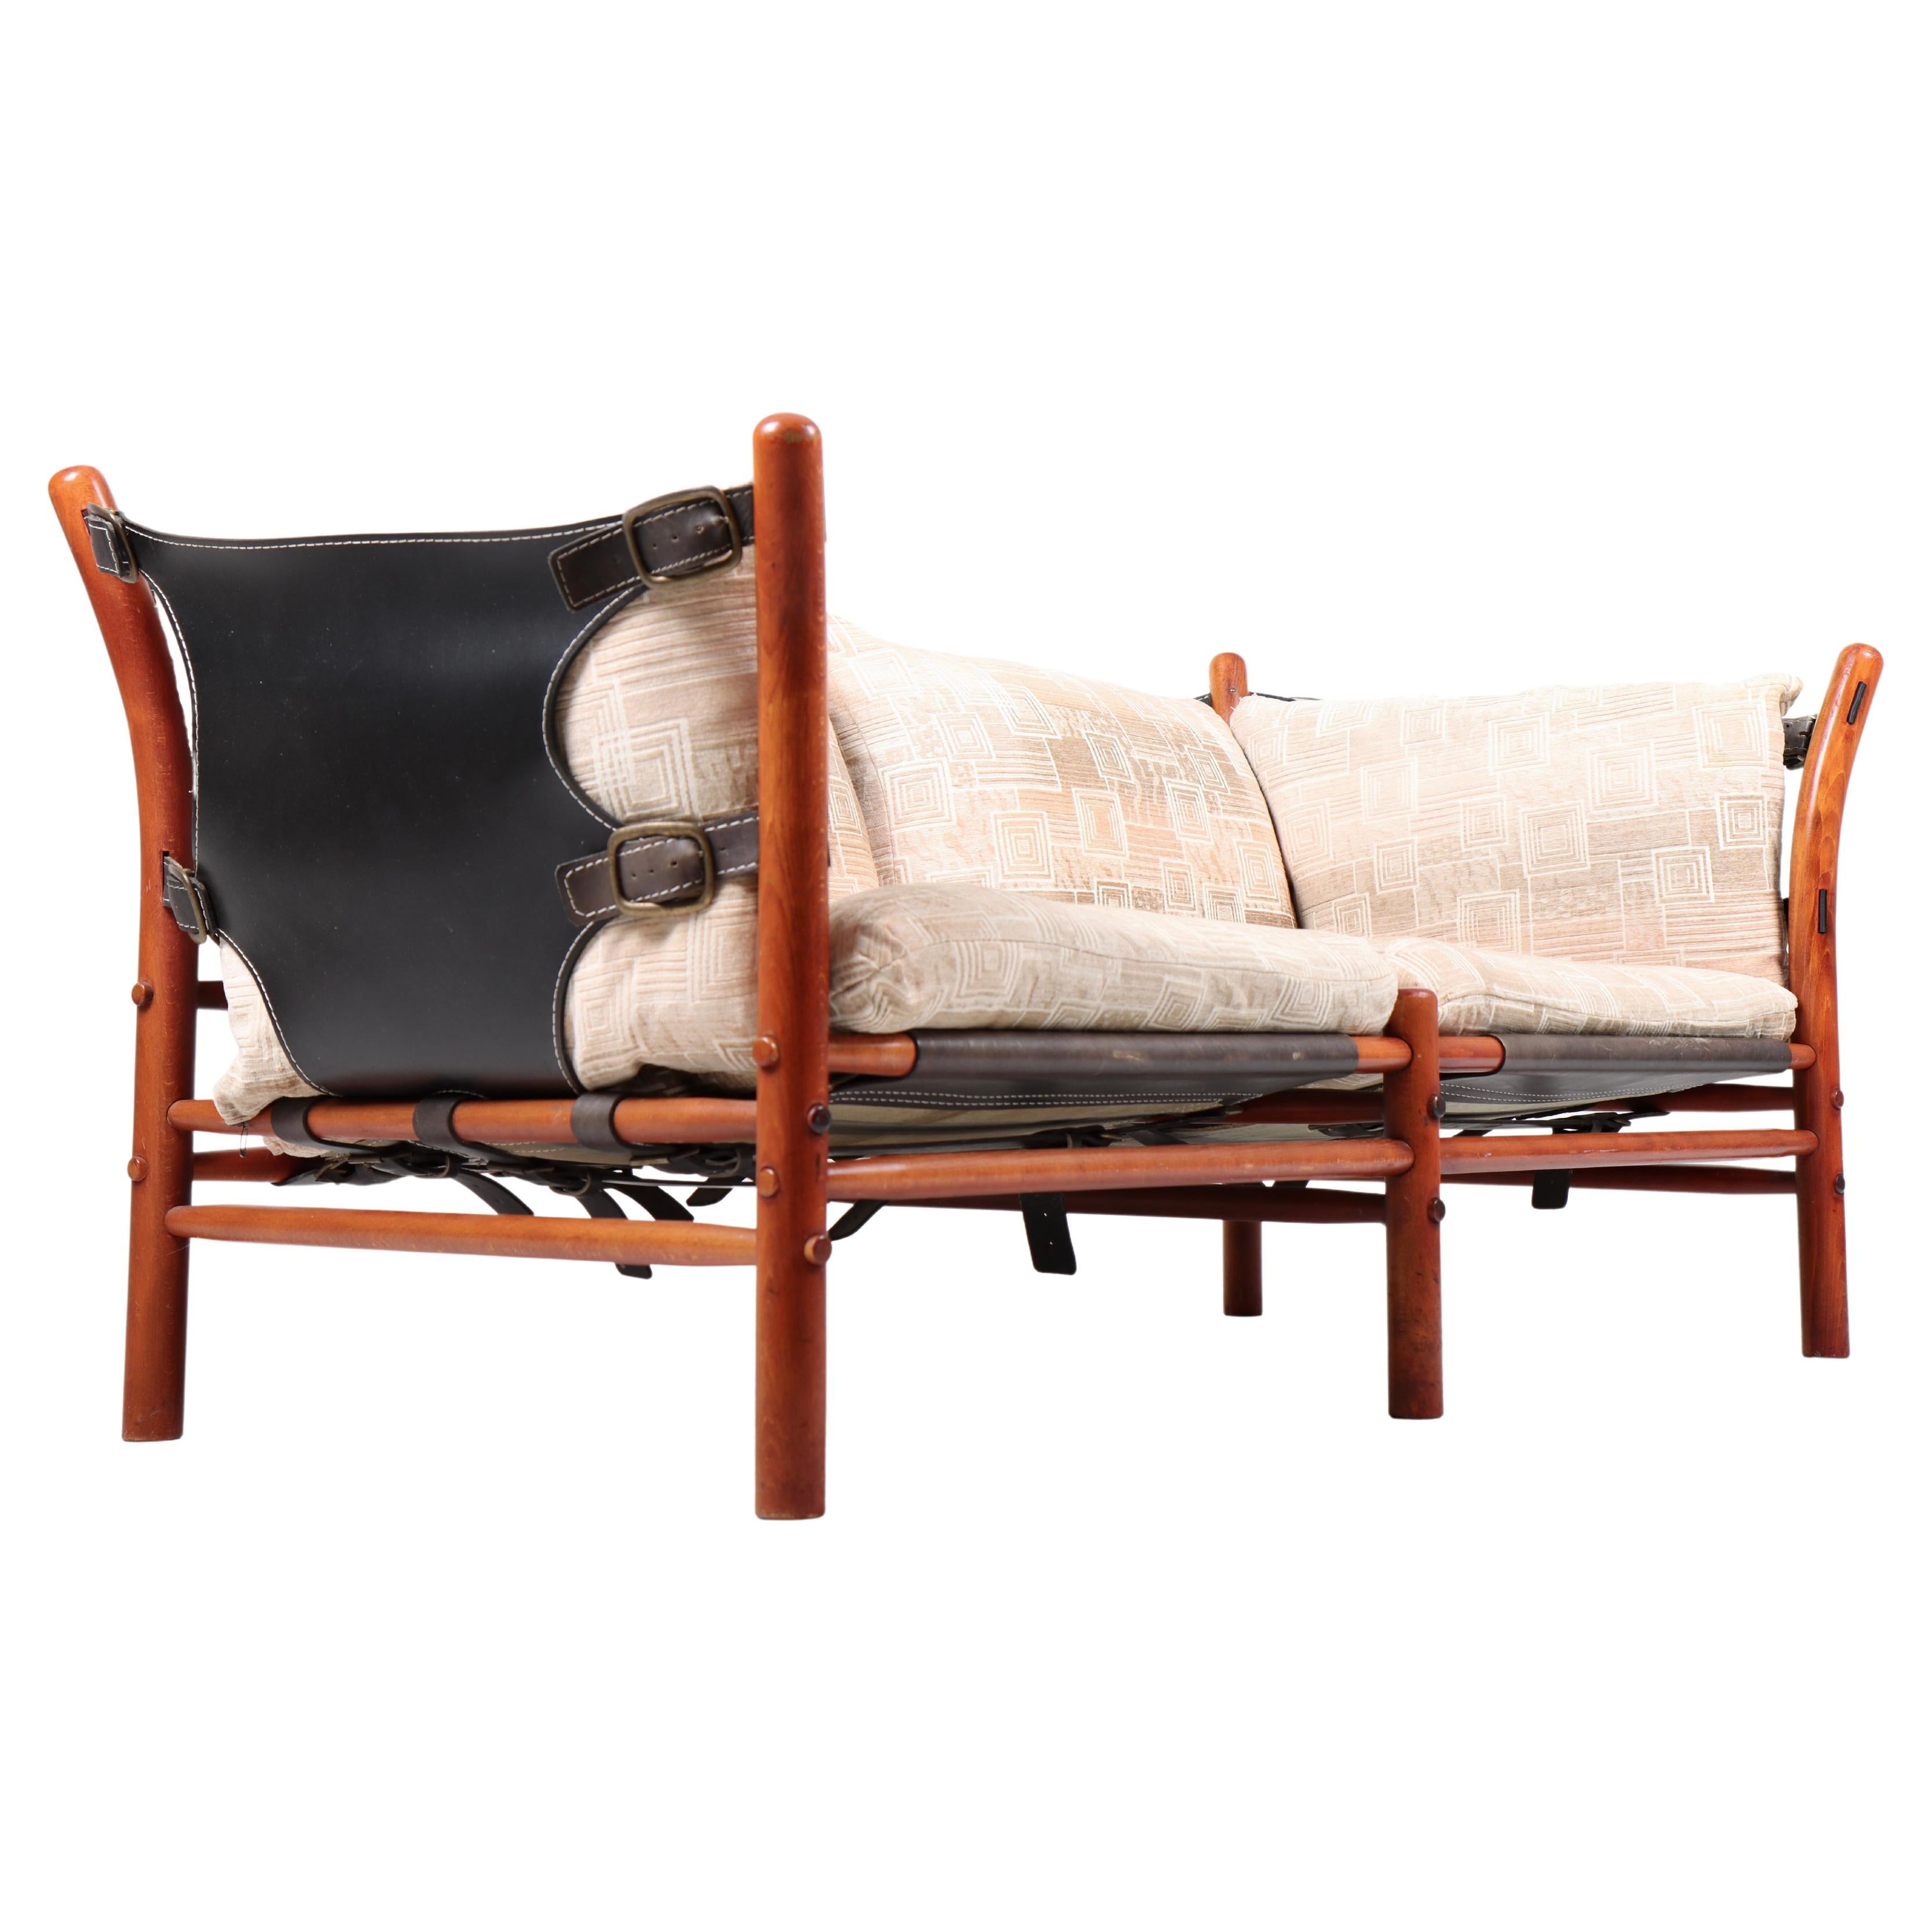 Two-seat sofa with fabric cushions, leather, wood frame and brass hardware. Model Ilona designed by Swedish architect Arne Norell for Norell Möbel AB in the 1960s. 

 